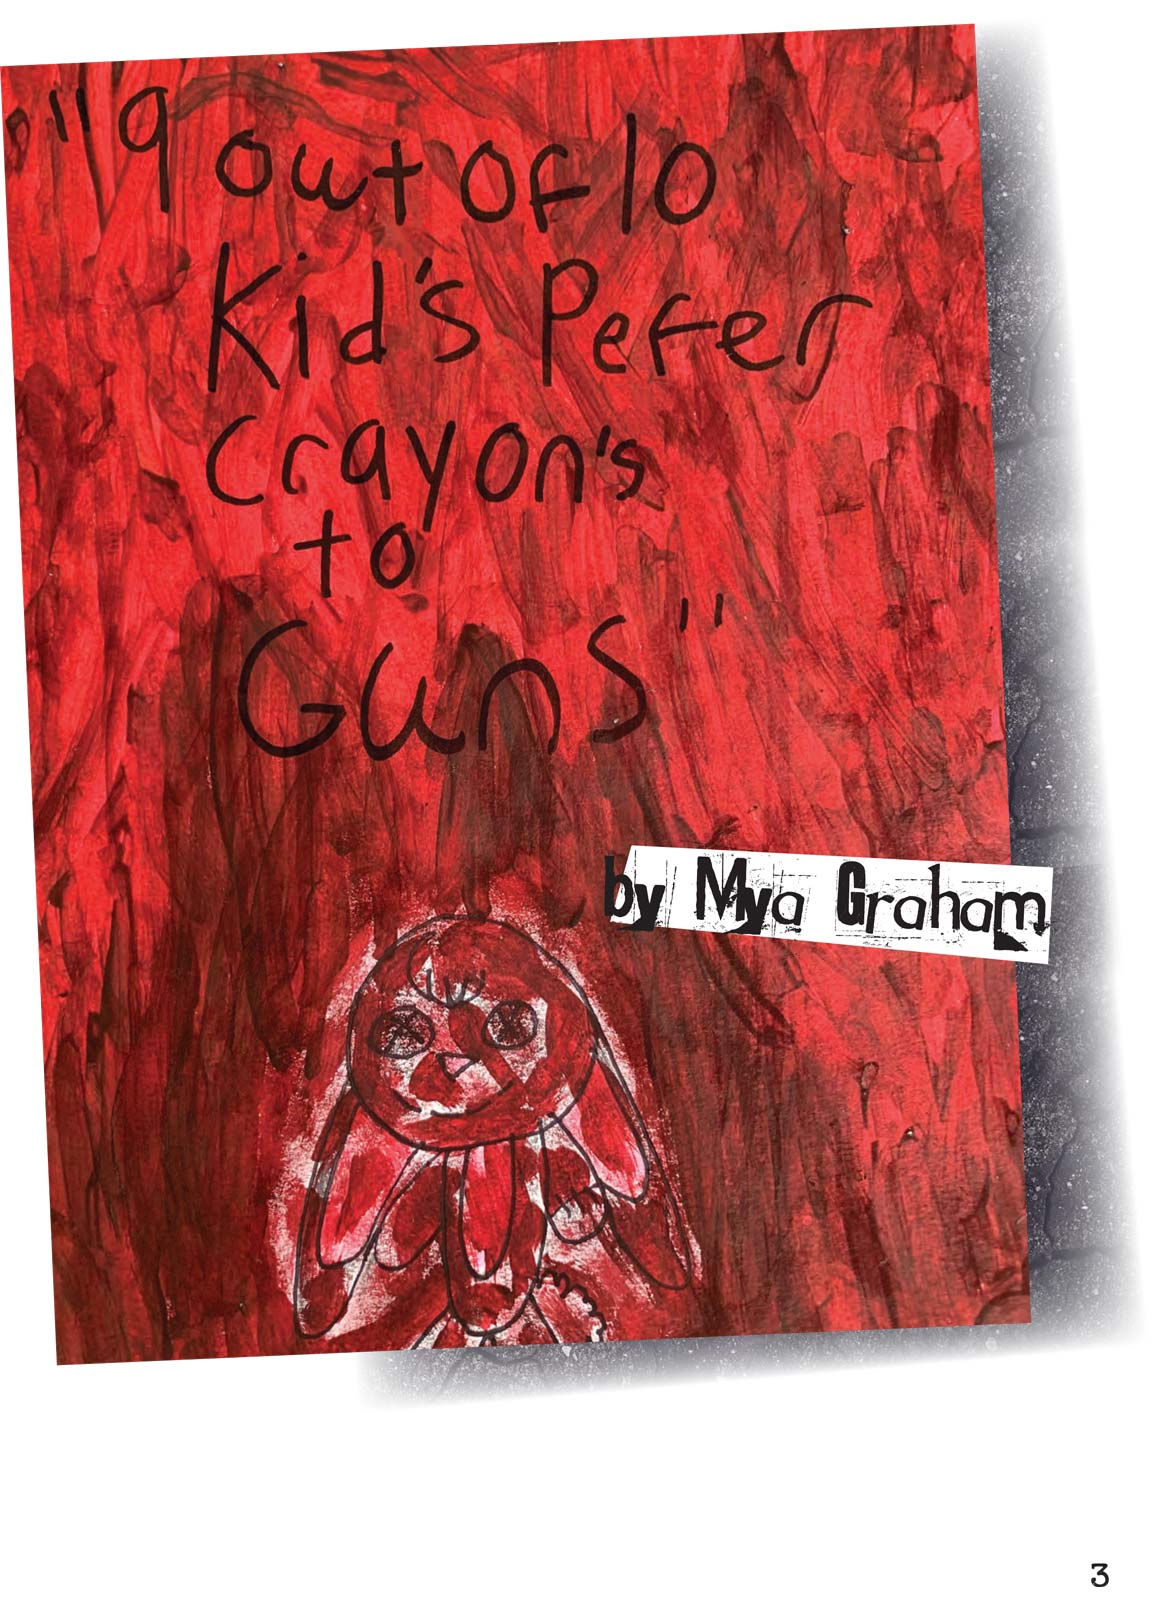 painting by Mya Graham of figure with x-ed out eyes on red ground, with text - 9 out of 10 kids prefer crayons to guns